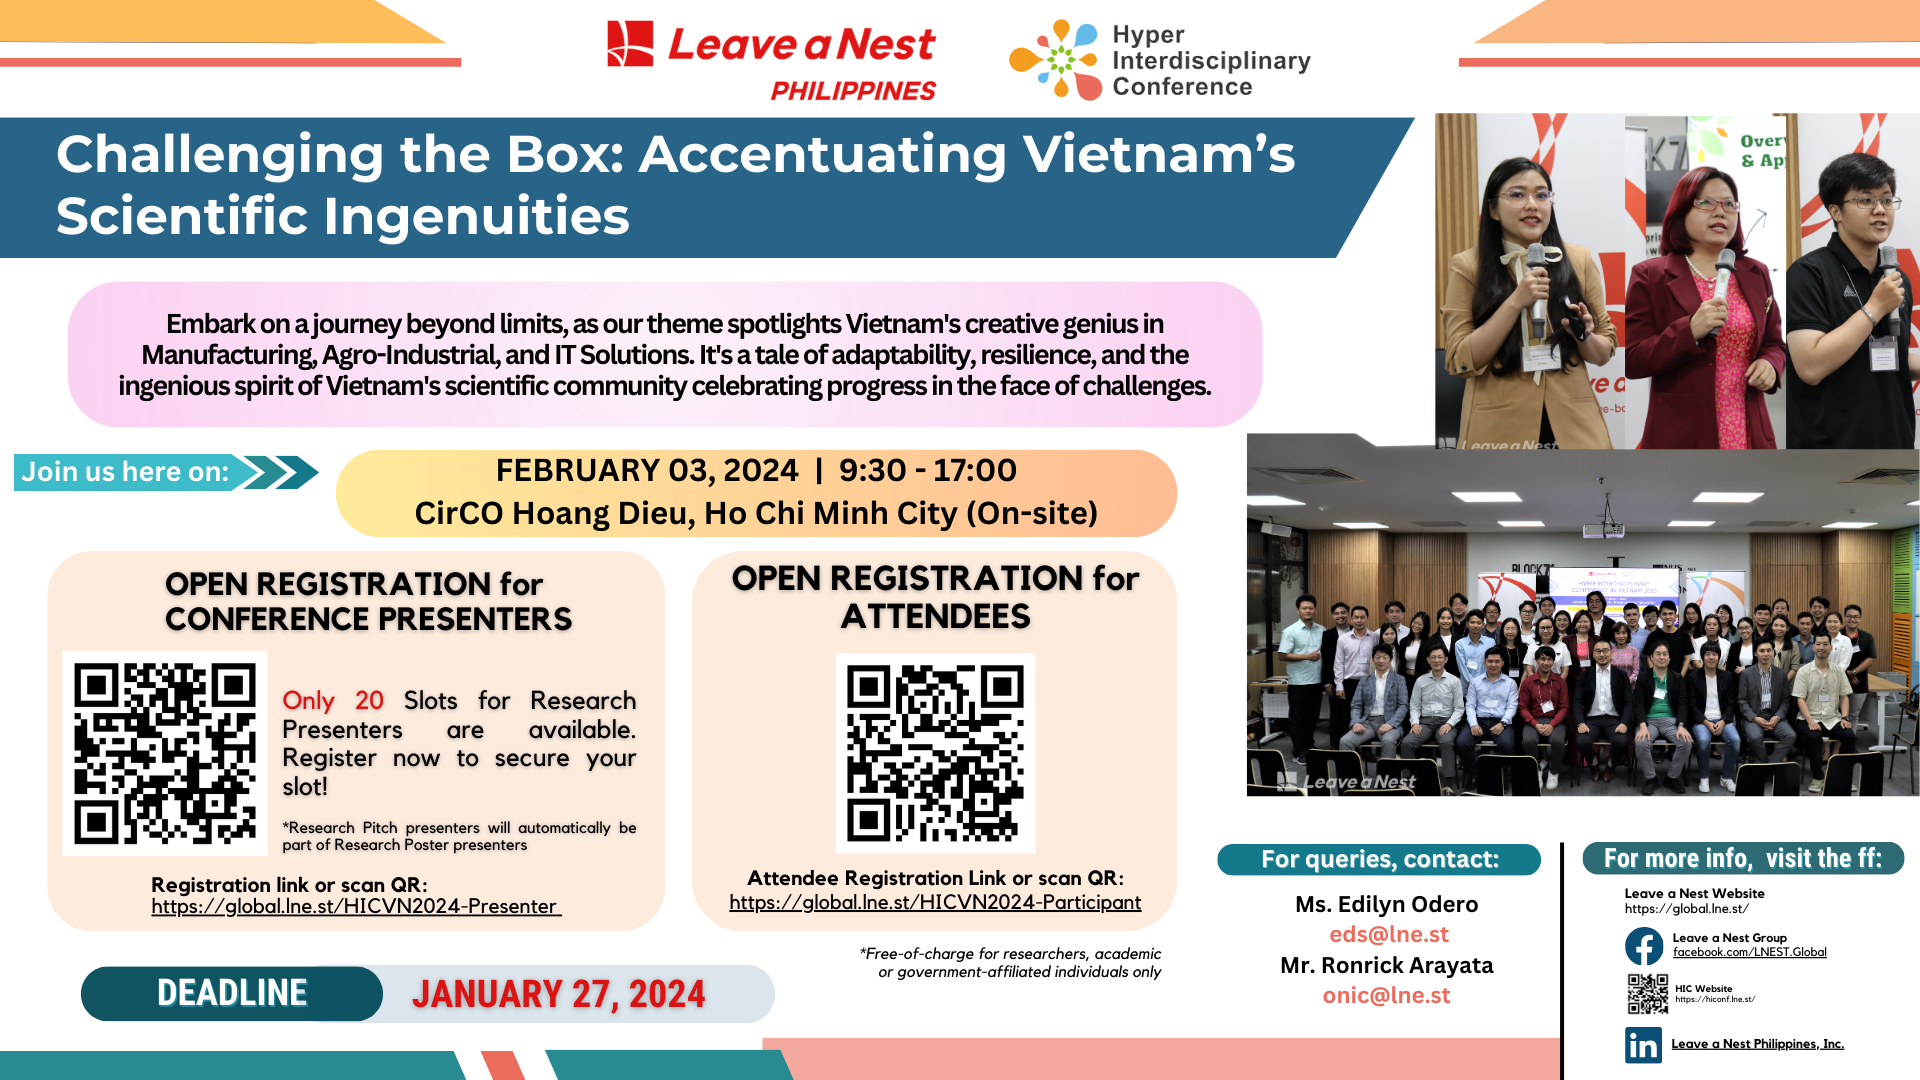 Boxing out opportunities: Leave a Nest Philippines Ties Collaboration for Hyper Interdisciplinary Conference in Vietnam